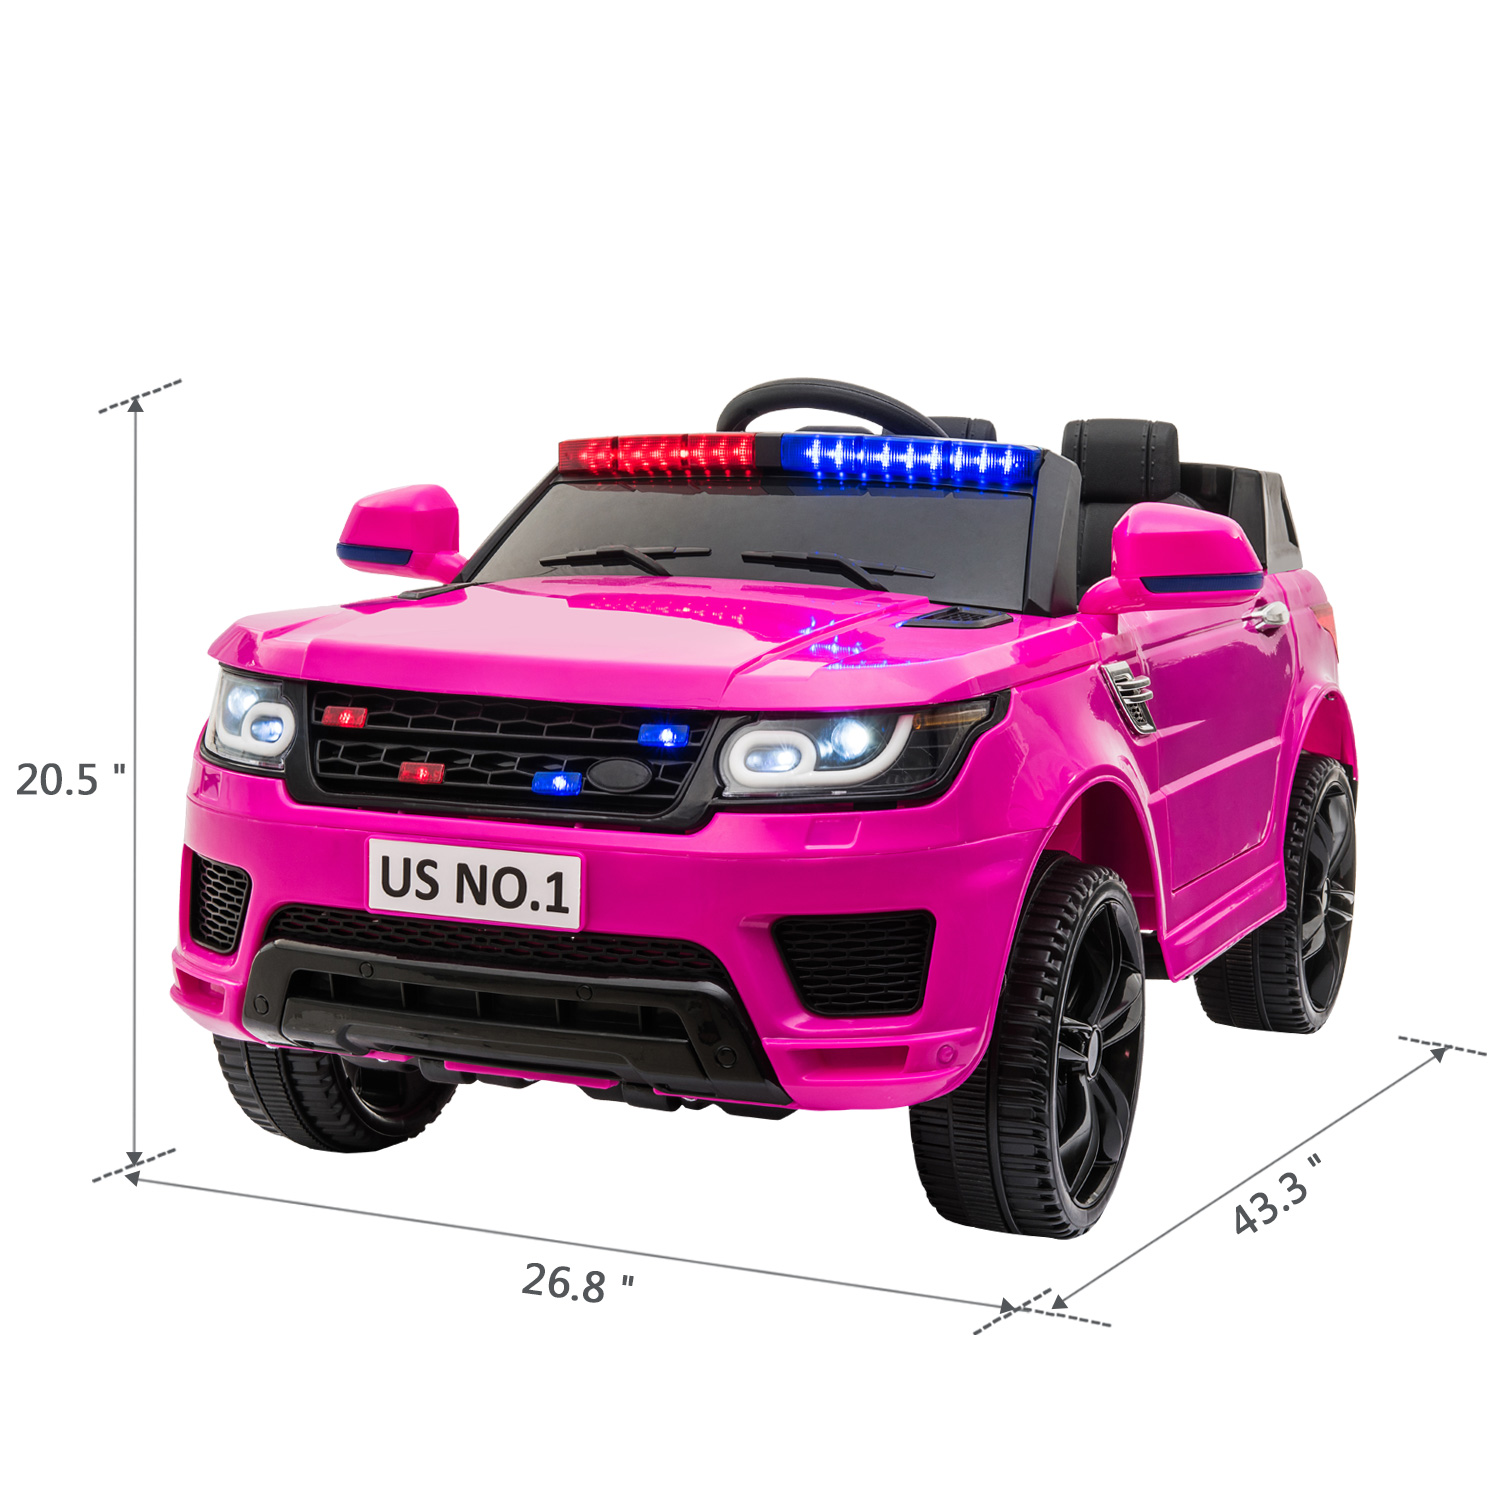 Tobbi Kid Ride on Police Car with Parental Remote Control, 12V Battery Powered Electric Truck Ride on Toy Vehicle ,Siren,Megaphone